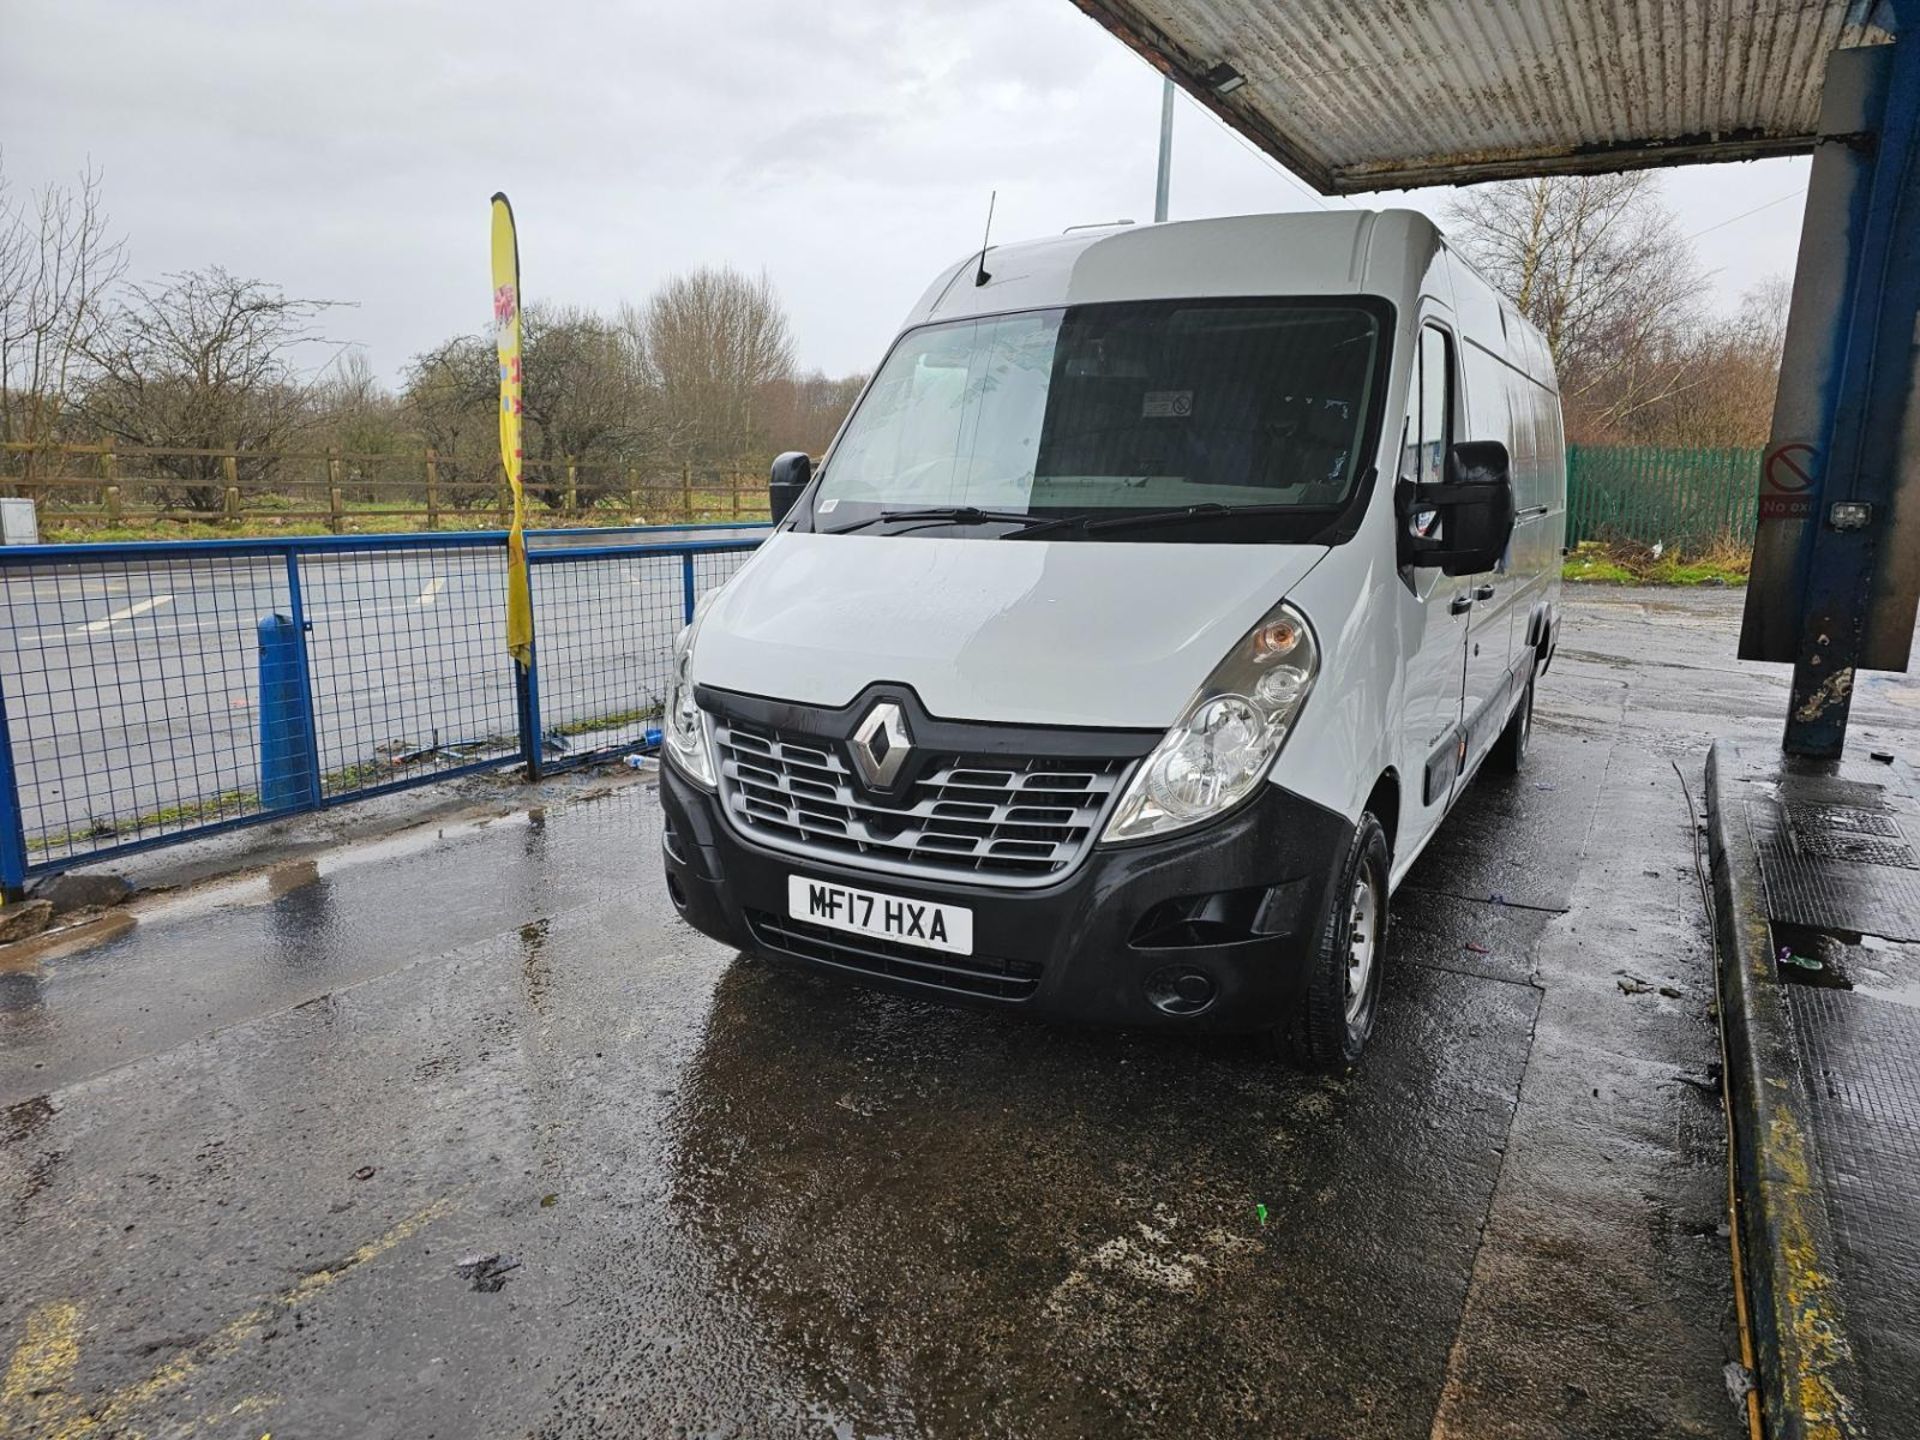 2017 RENAULT MASTER LML35 ENERGY DCI 145 BUSINESS EXTRA LONG WHEEL BASE HIGH ROOF - Image 2 of 11